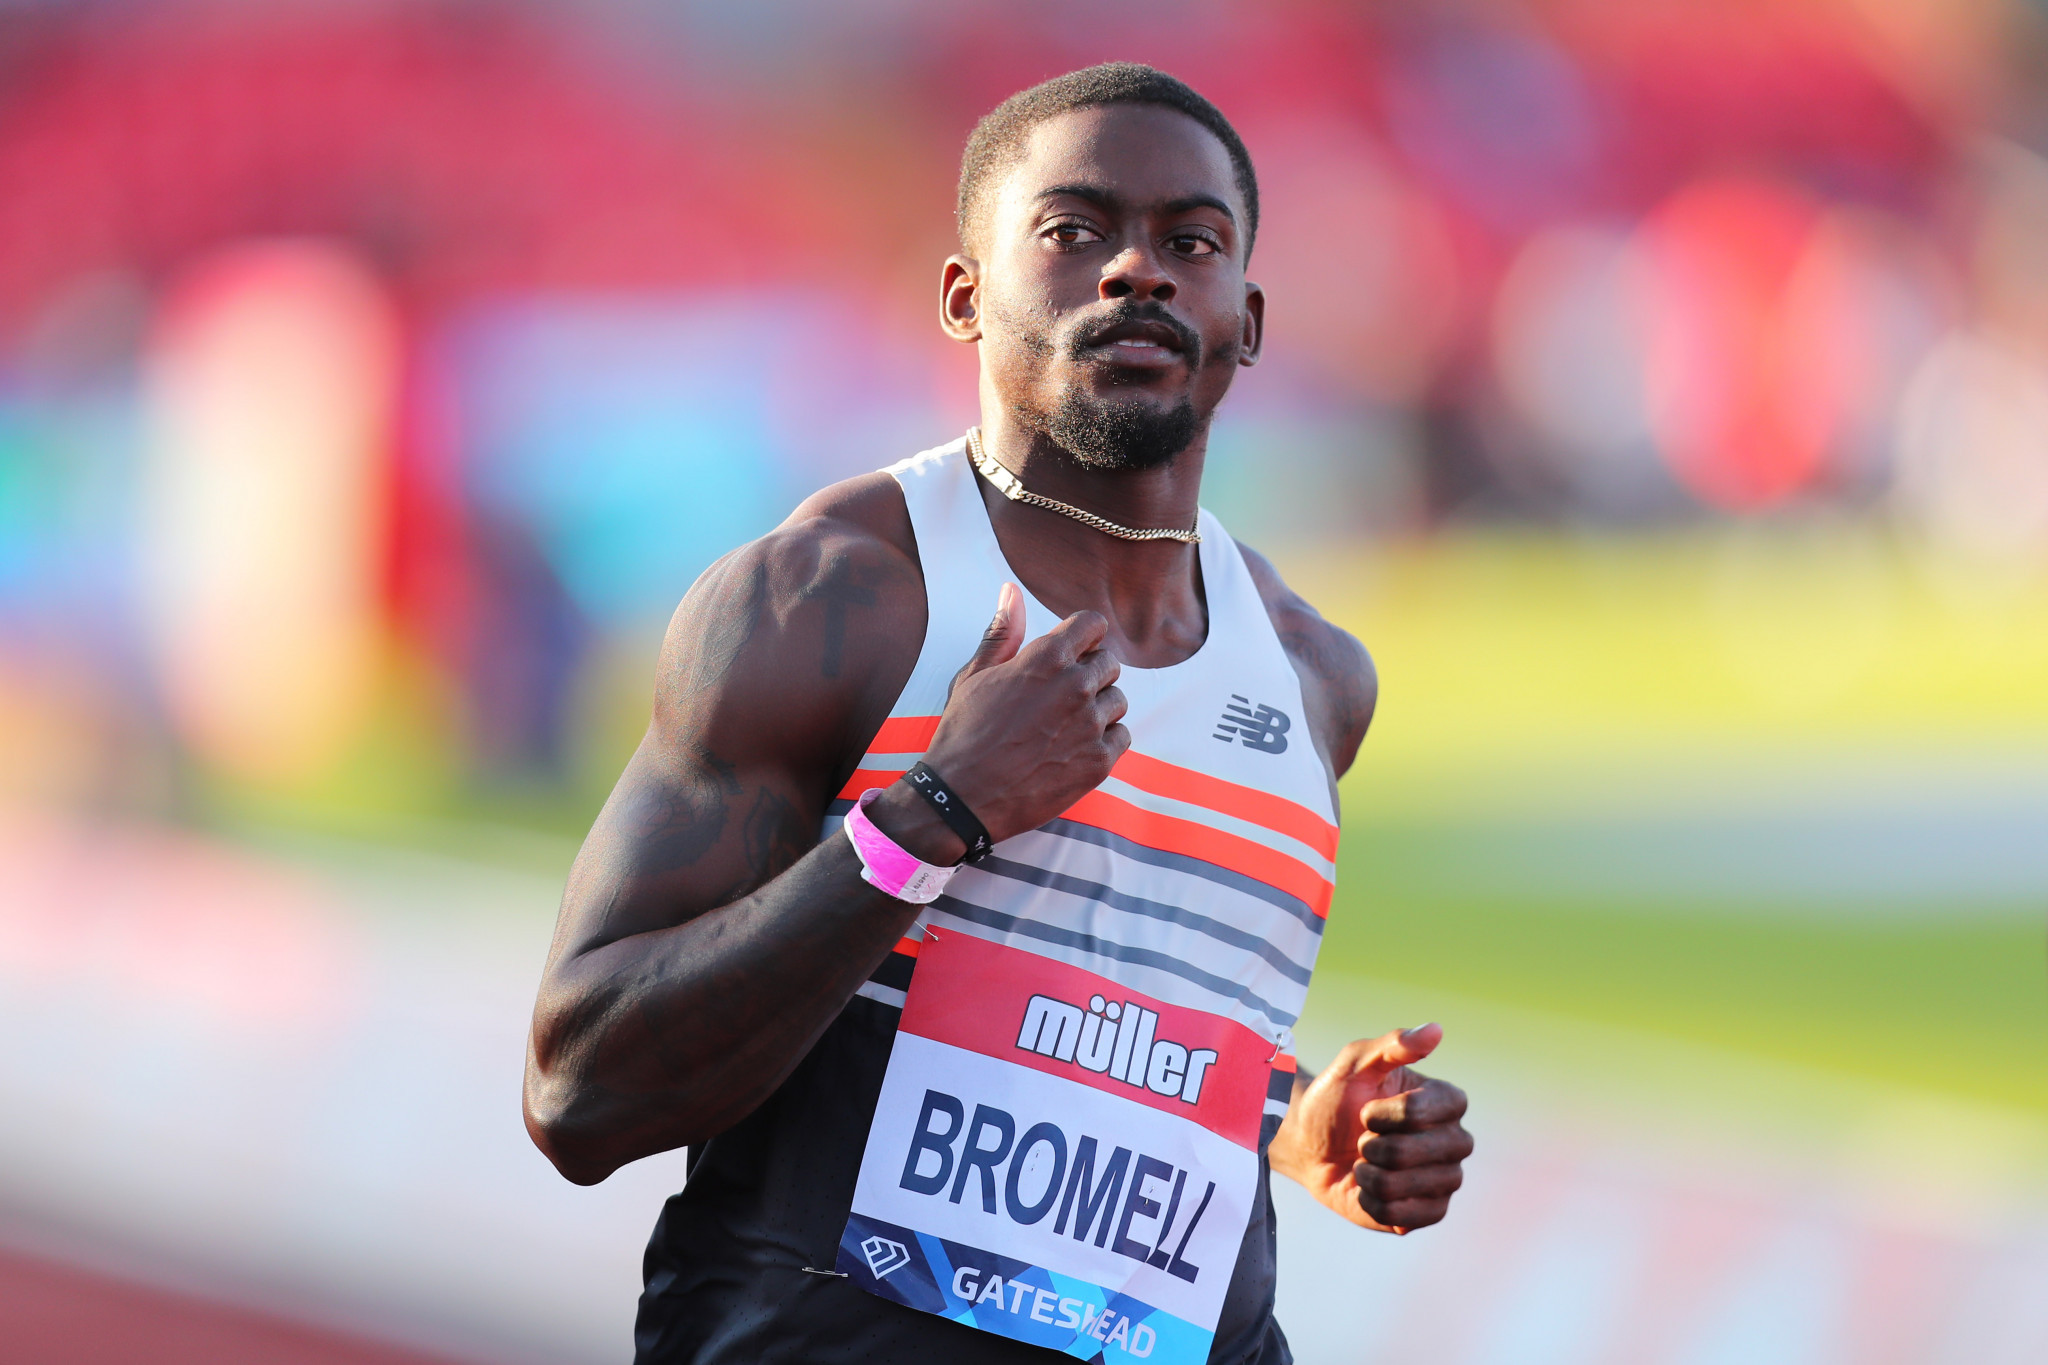 US Olympic 100m favourite Trayvon Bromell looked the part as he won at the Gateshead Diamond League meeting ©Getty Images